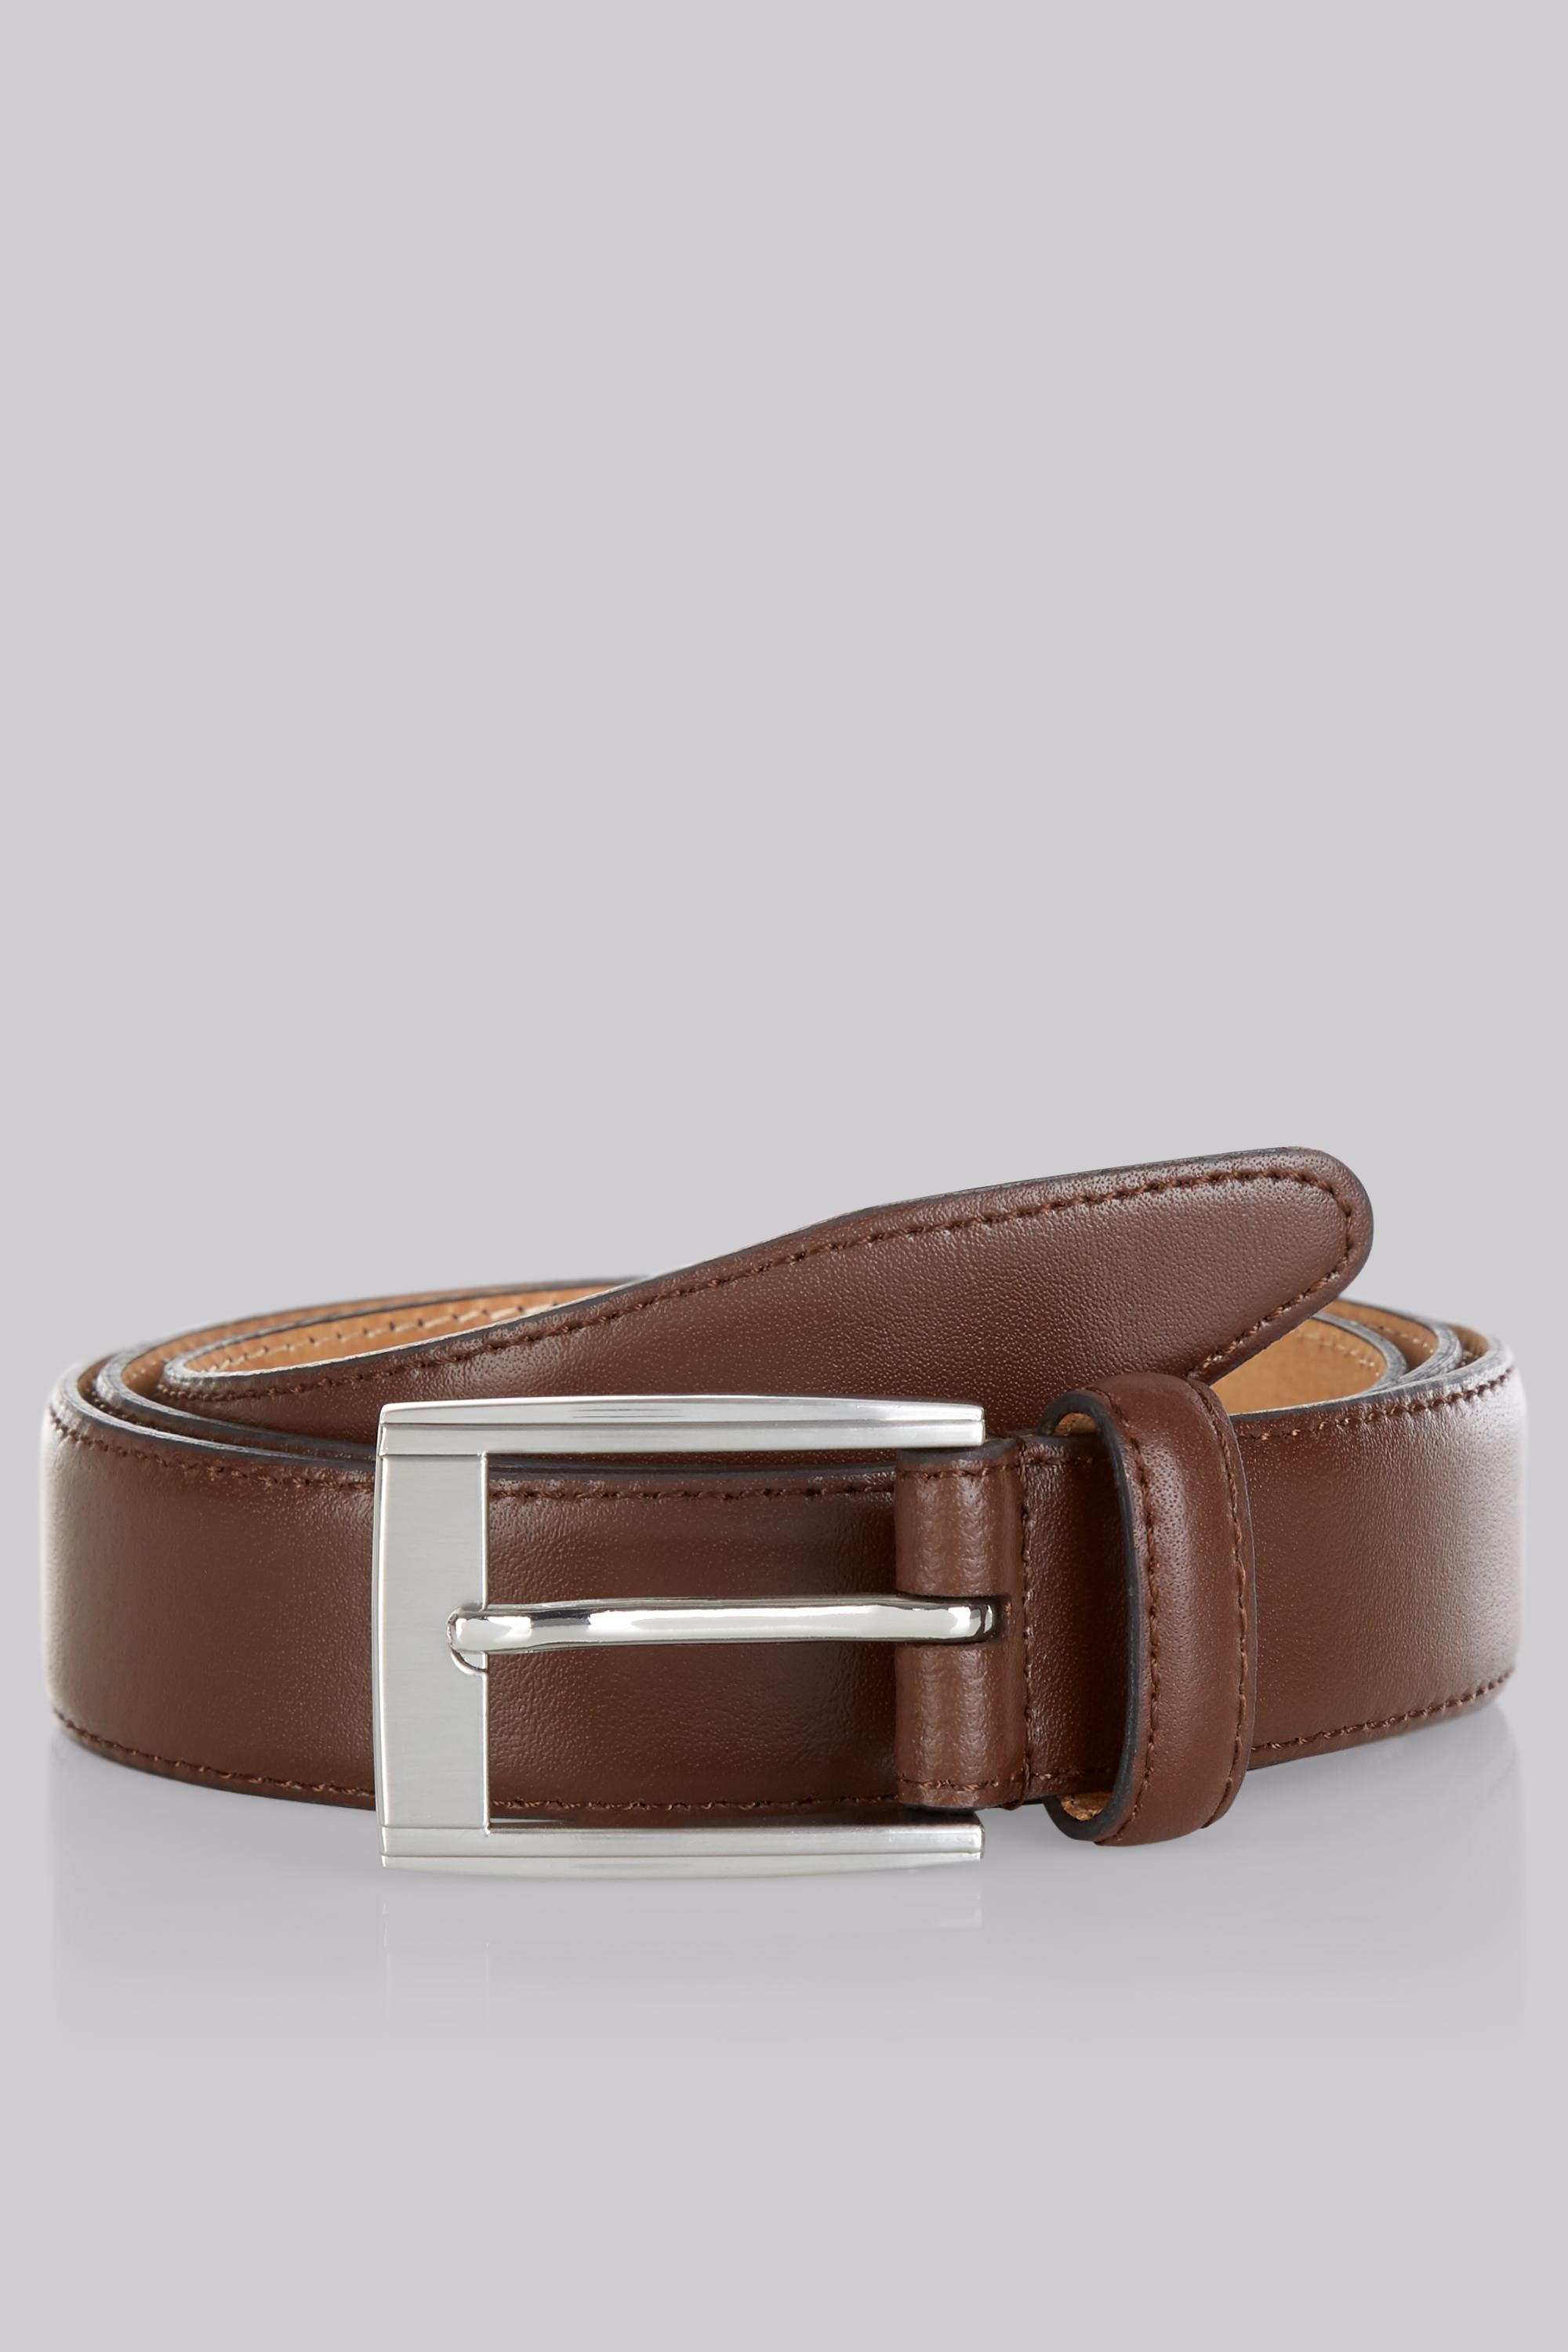 Moss 1851 Brown Real Leather Belt